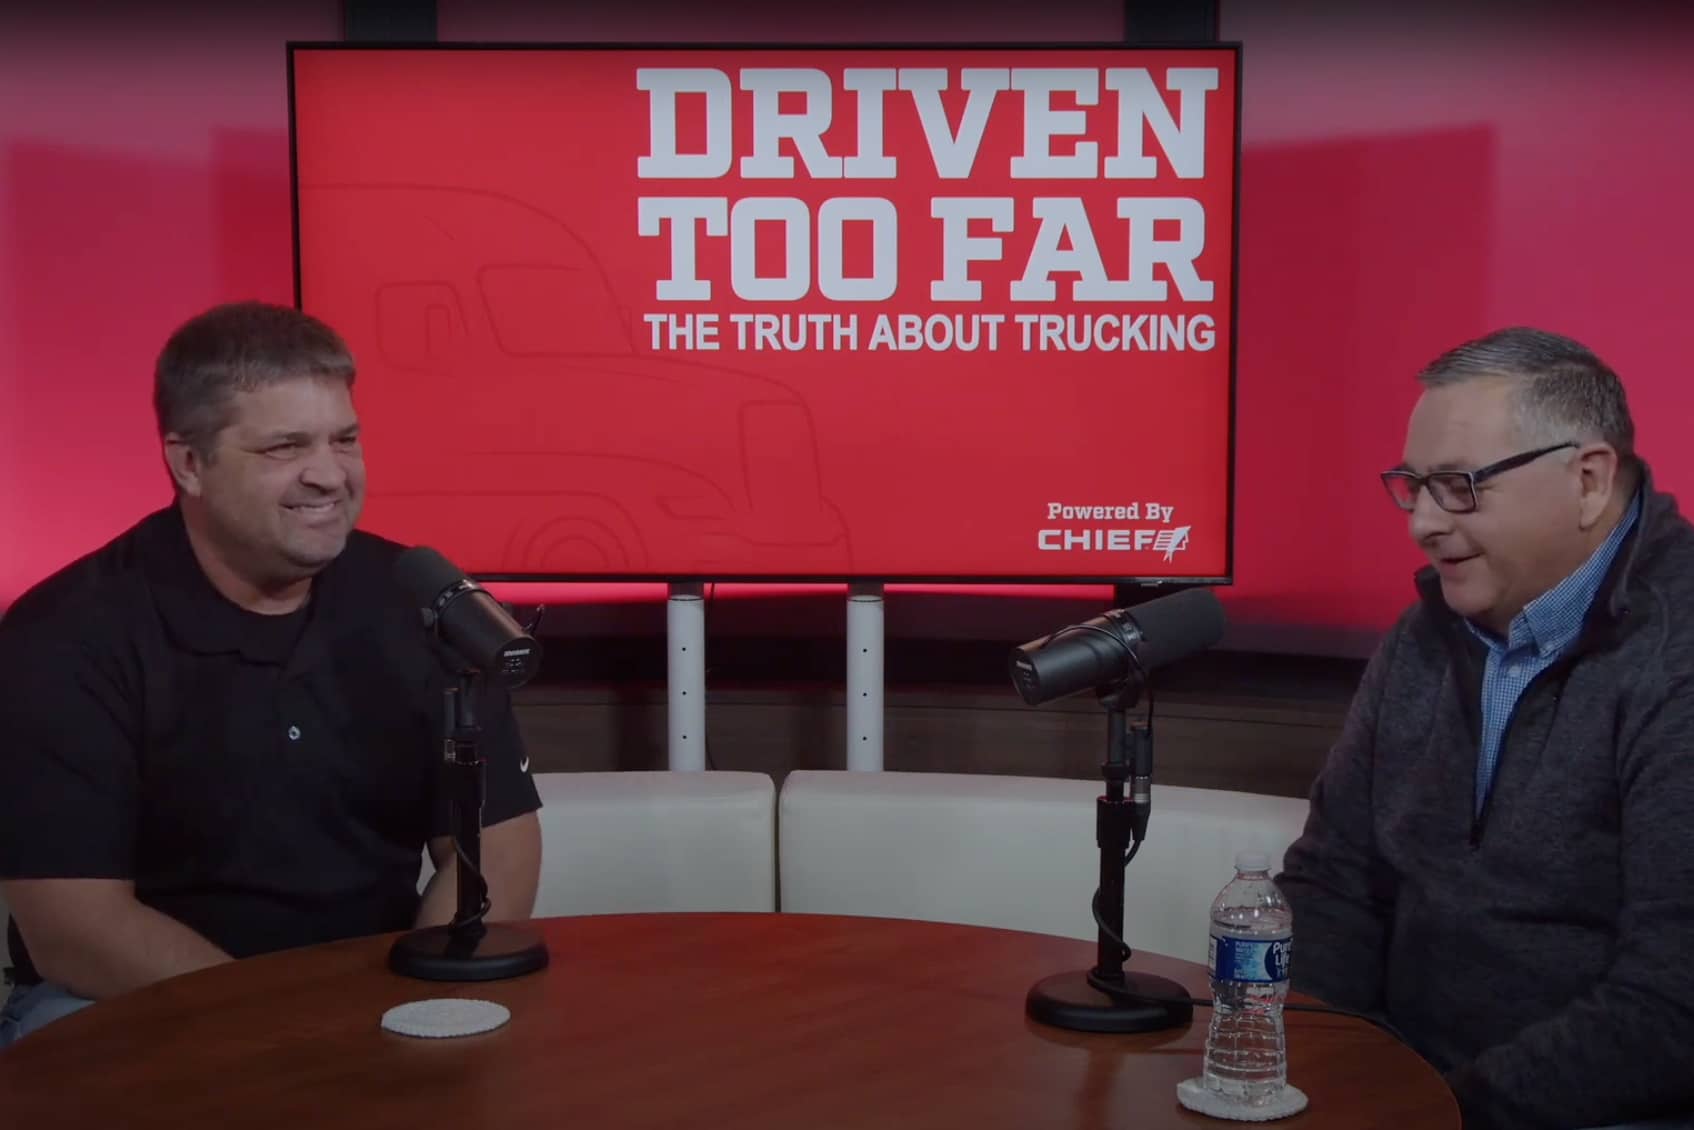 Andrew Winkler sits down with Brent Falgione, the President of Greater Omaha Express, to discuss the importance of accident procedures for truckers on an episode of the Driven Too Far podcast.